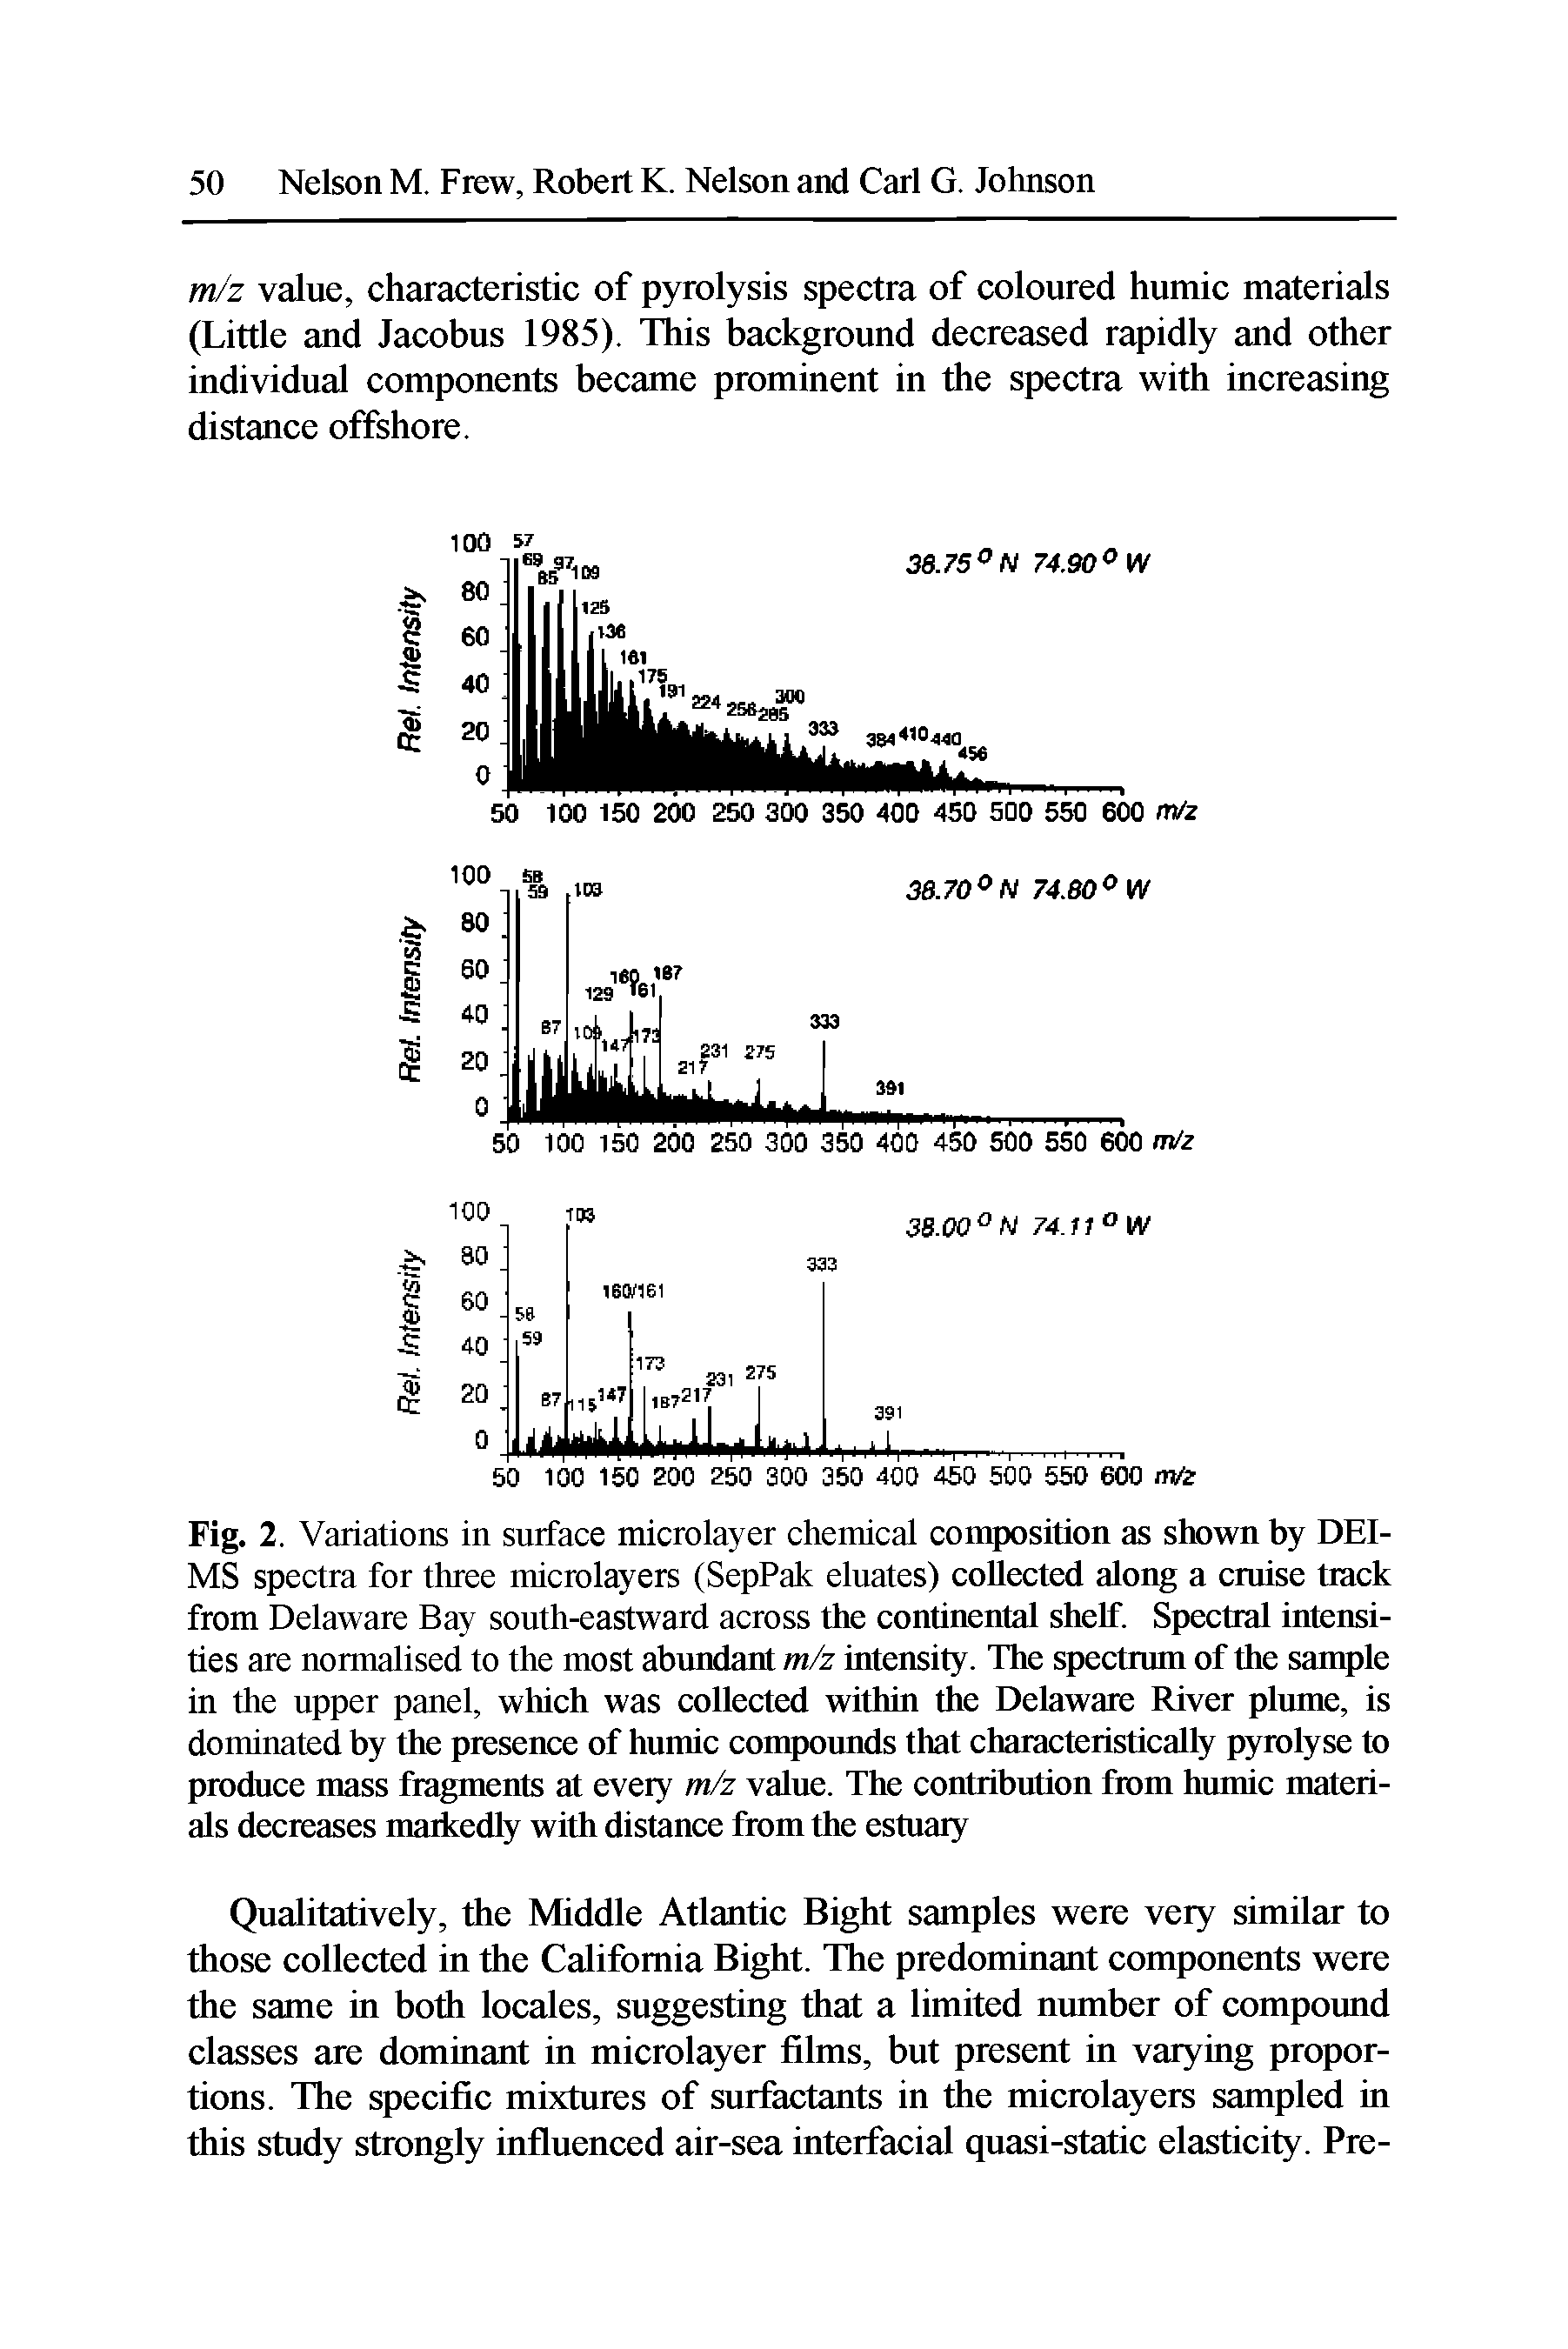 Fig. 2. Variations in surface microlayer chemical composition as shown by DEI-MS spectra for three microlayers (SepPak eluates) collected along a cruise track from Delaware Bay south-eastward across the continental shelf. Spectral intensities are normalised to the most abundant m/z intensity. The spectrum of the sample in the upper panel, which was collected within the Delaware River plume, is dominated by the presence of humic compounds that characteristically pyrolyse to produce mass fragments at every m/z value. The contribution from humic materials decreases markedly with distance from the estuary...